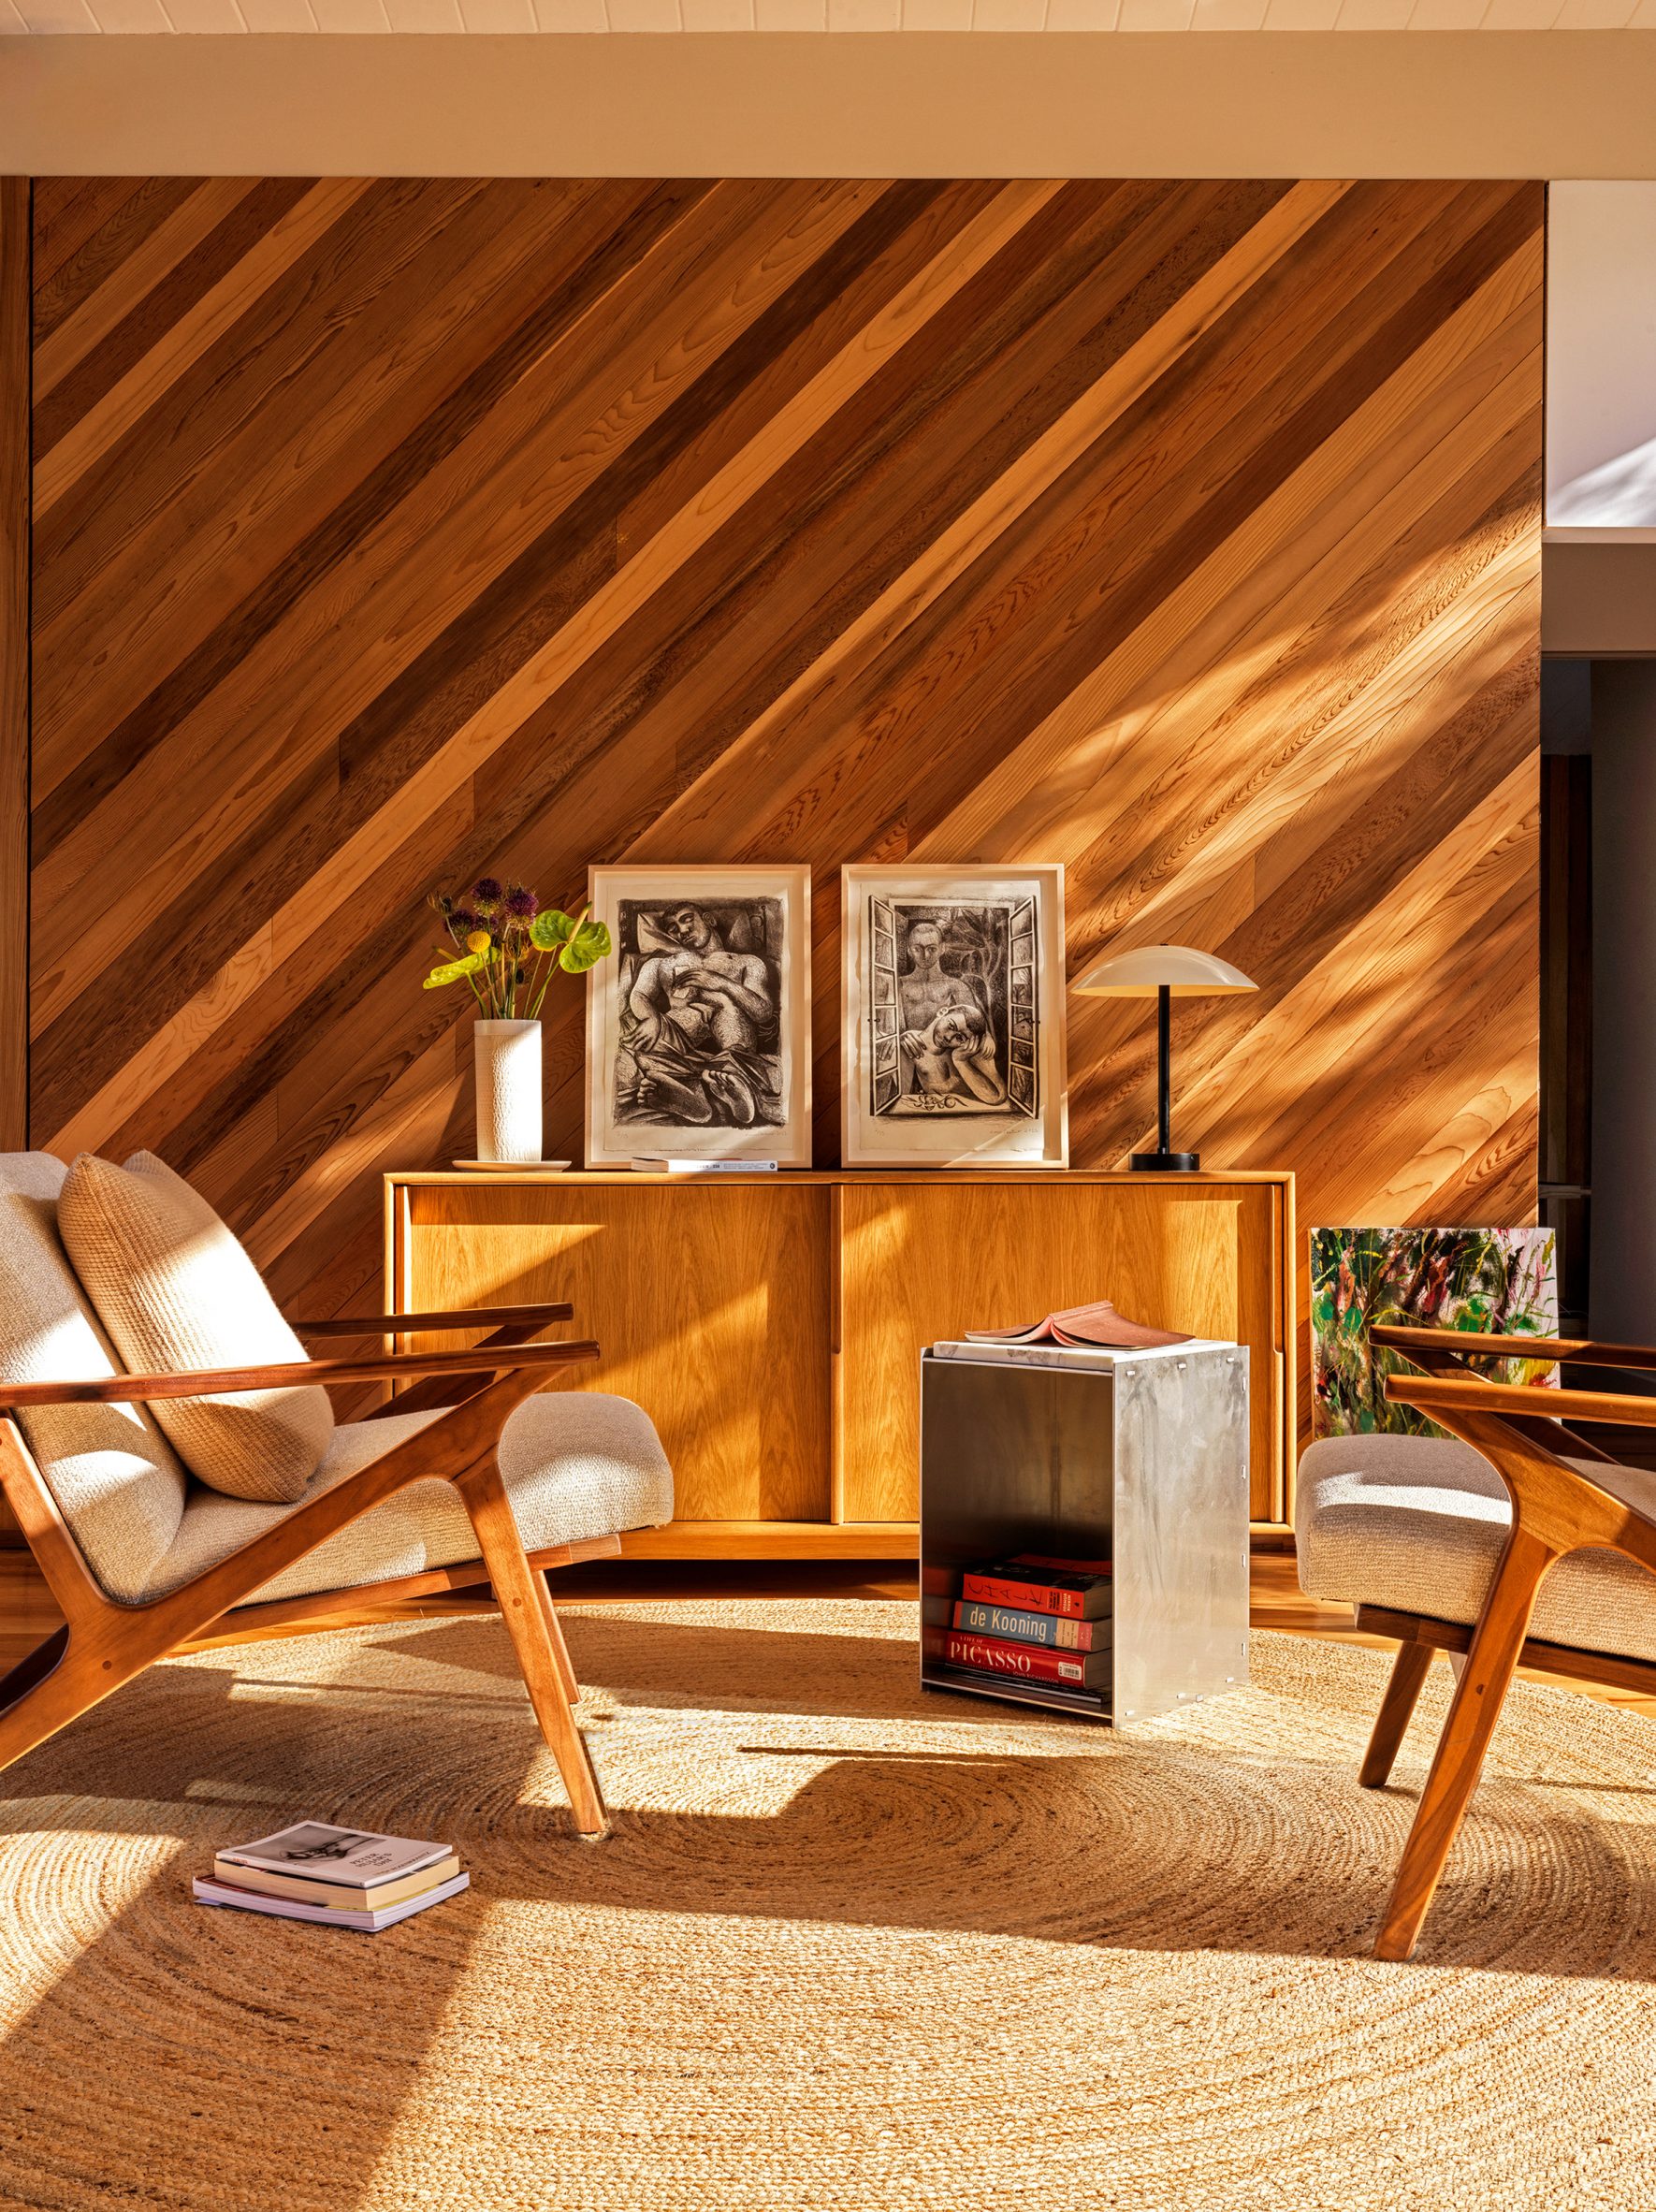 Cedar panelling installed diagonally in a lounge area with armchairs